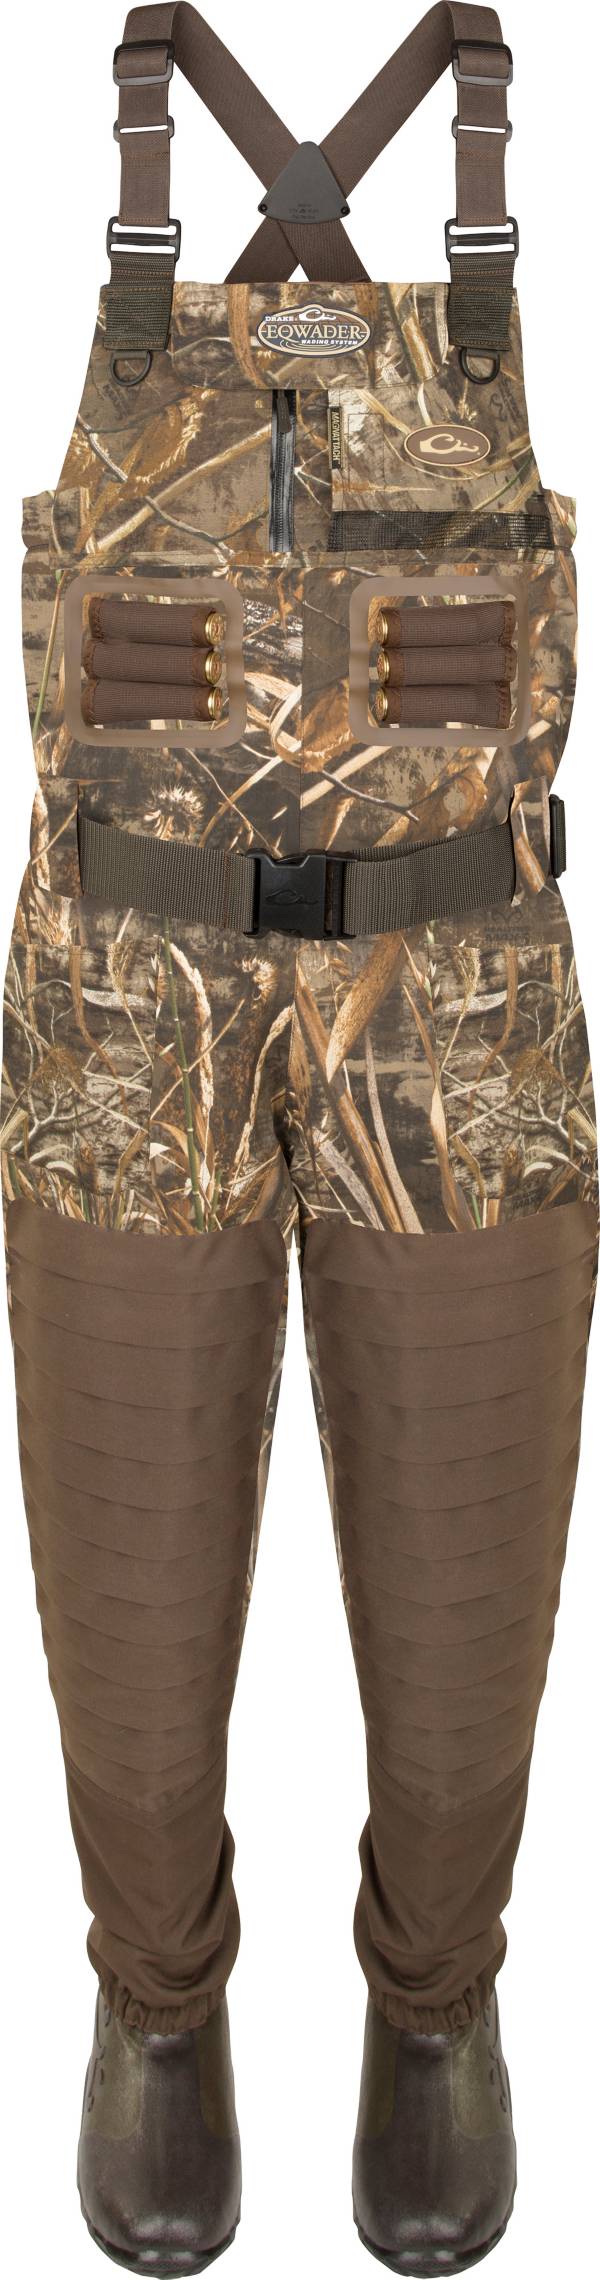 Drake Waterfowl Guardian Elite Uninsulated Breathable Chest Waders product image